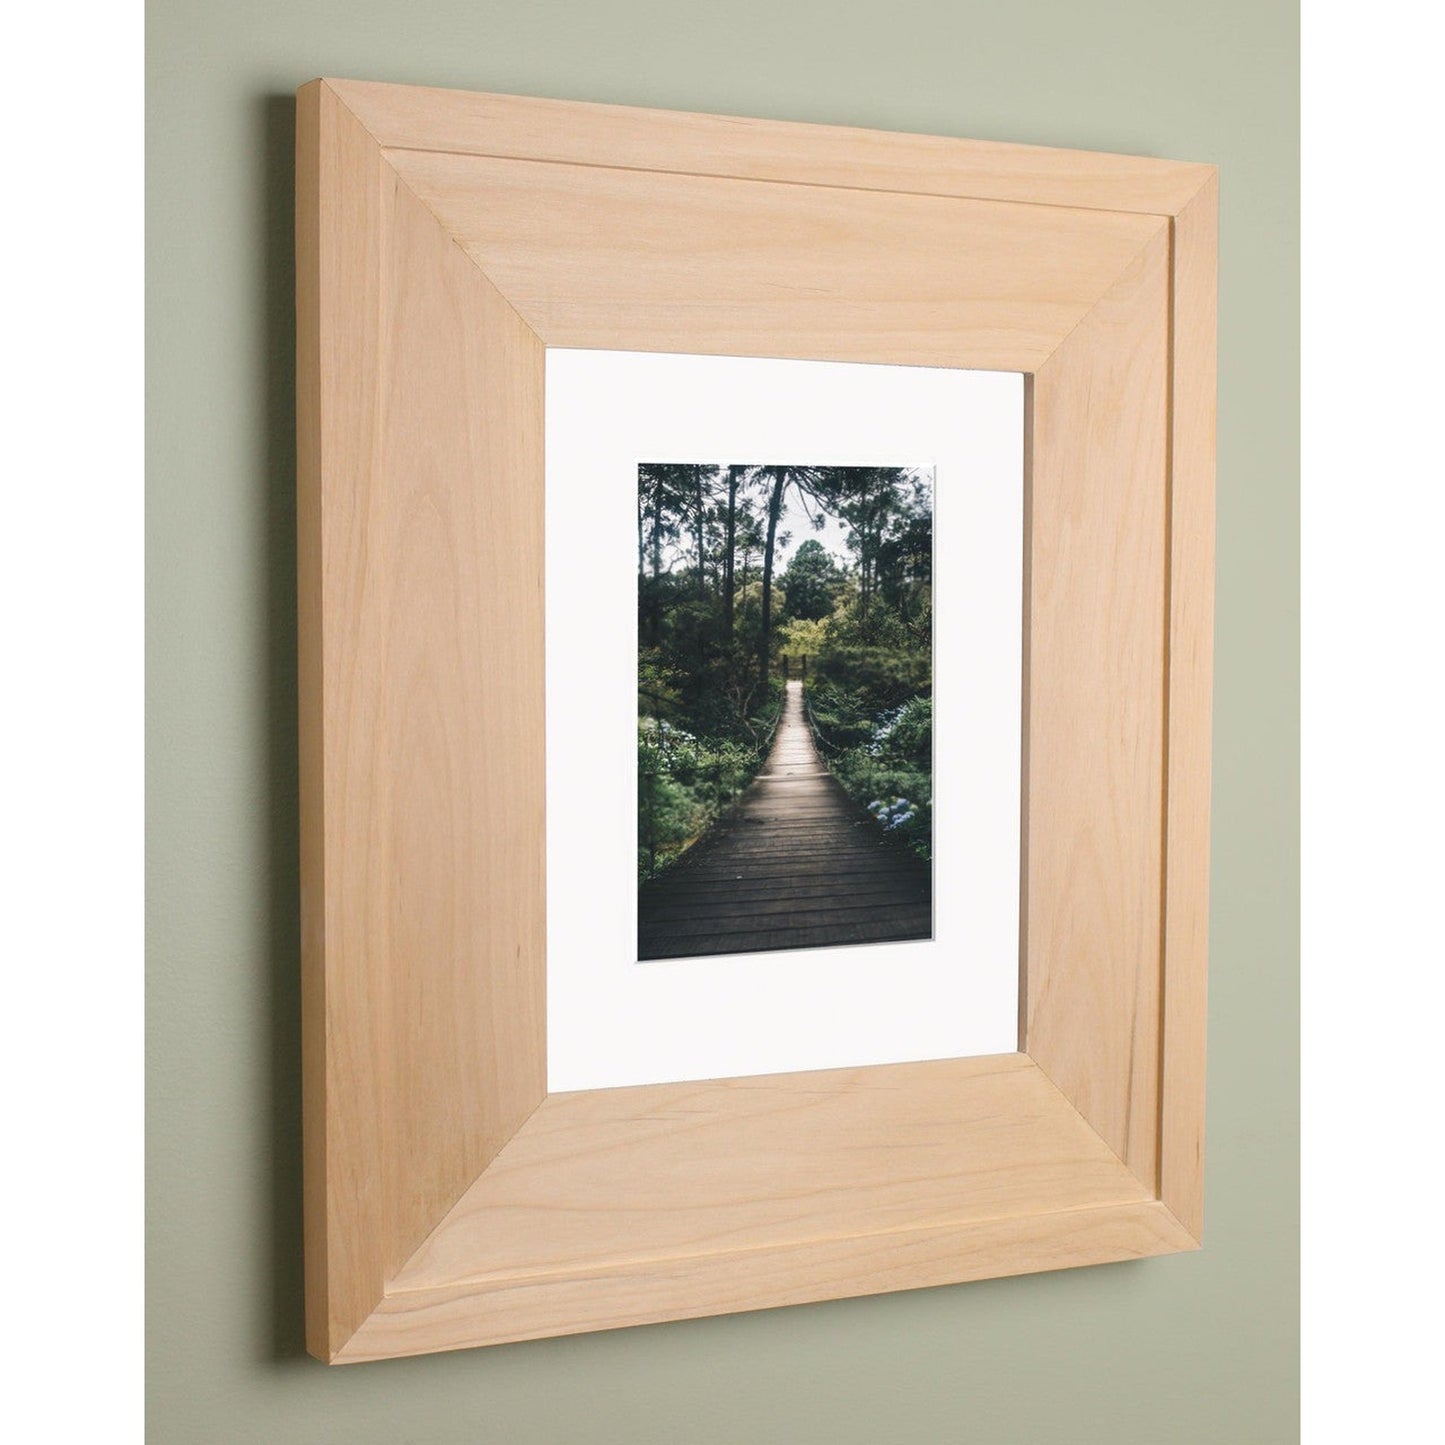 Fox Hollow Furnishings 11" x 14" Unfinished Raised Edge Compact Portrait Standard 4" Depth Recessed Picture Frame Medicine Cabinet With White Matting